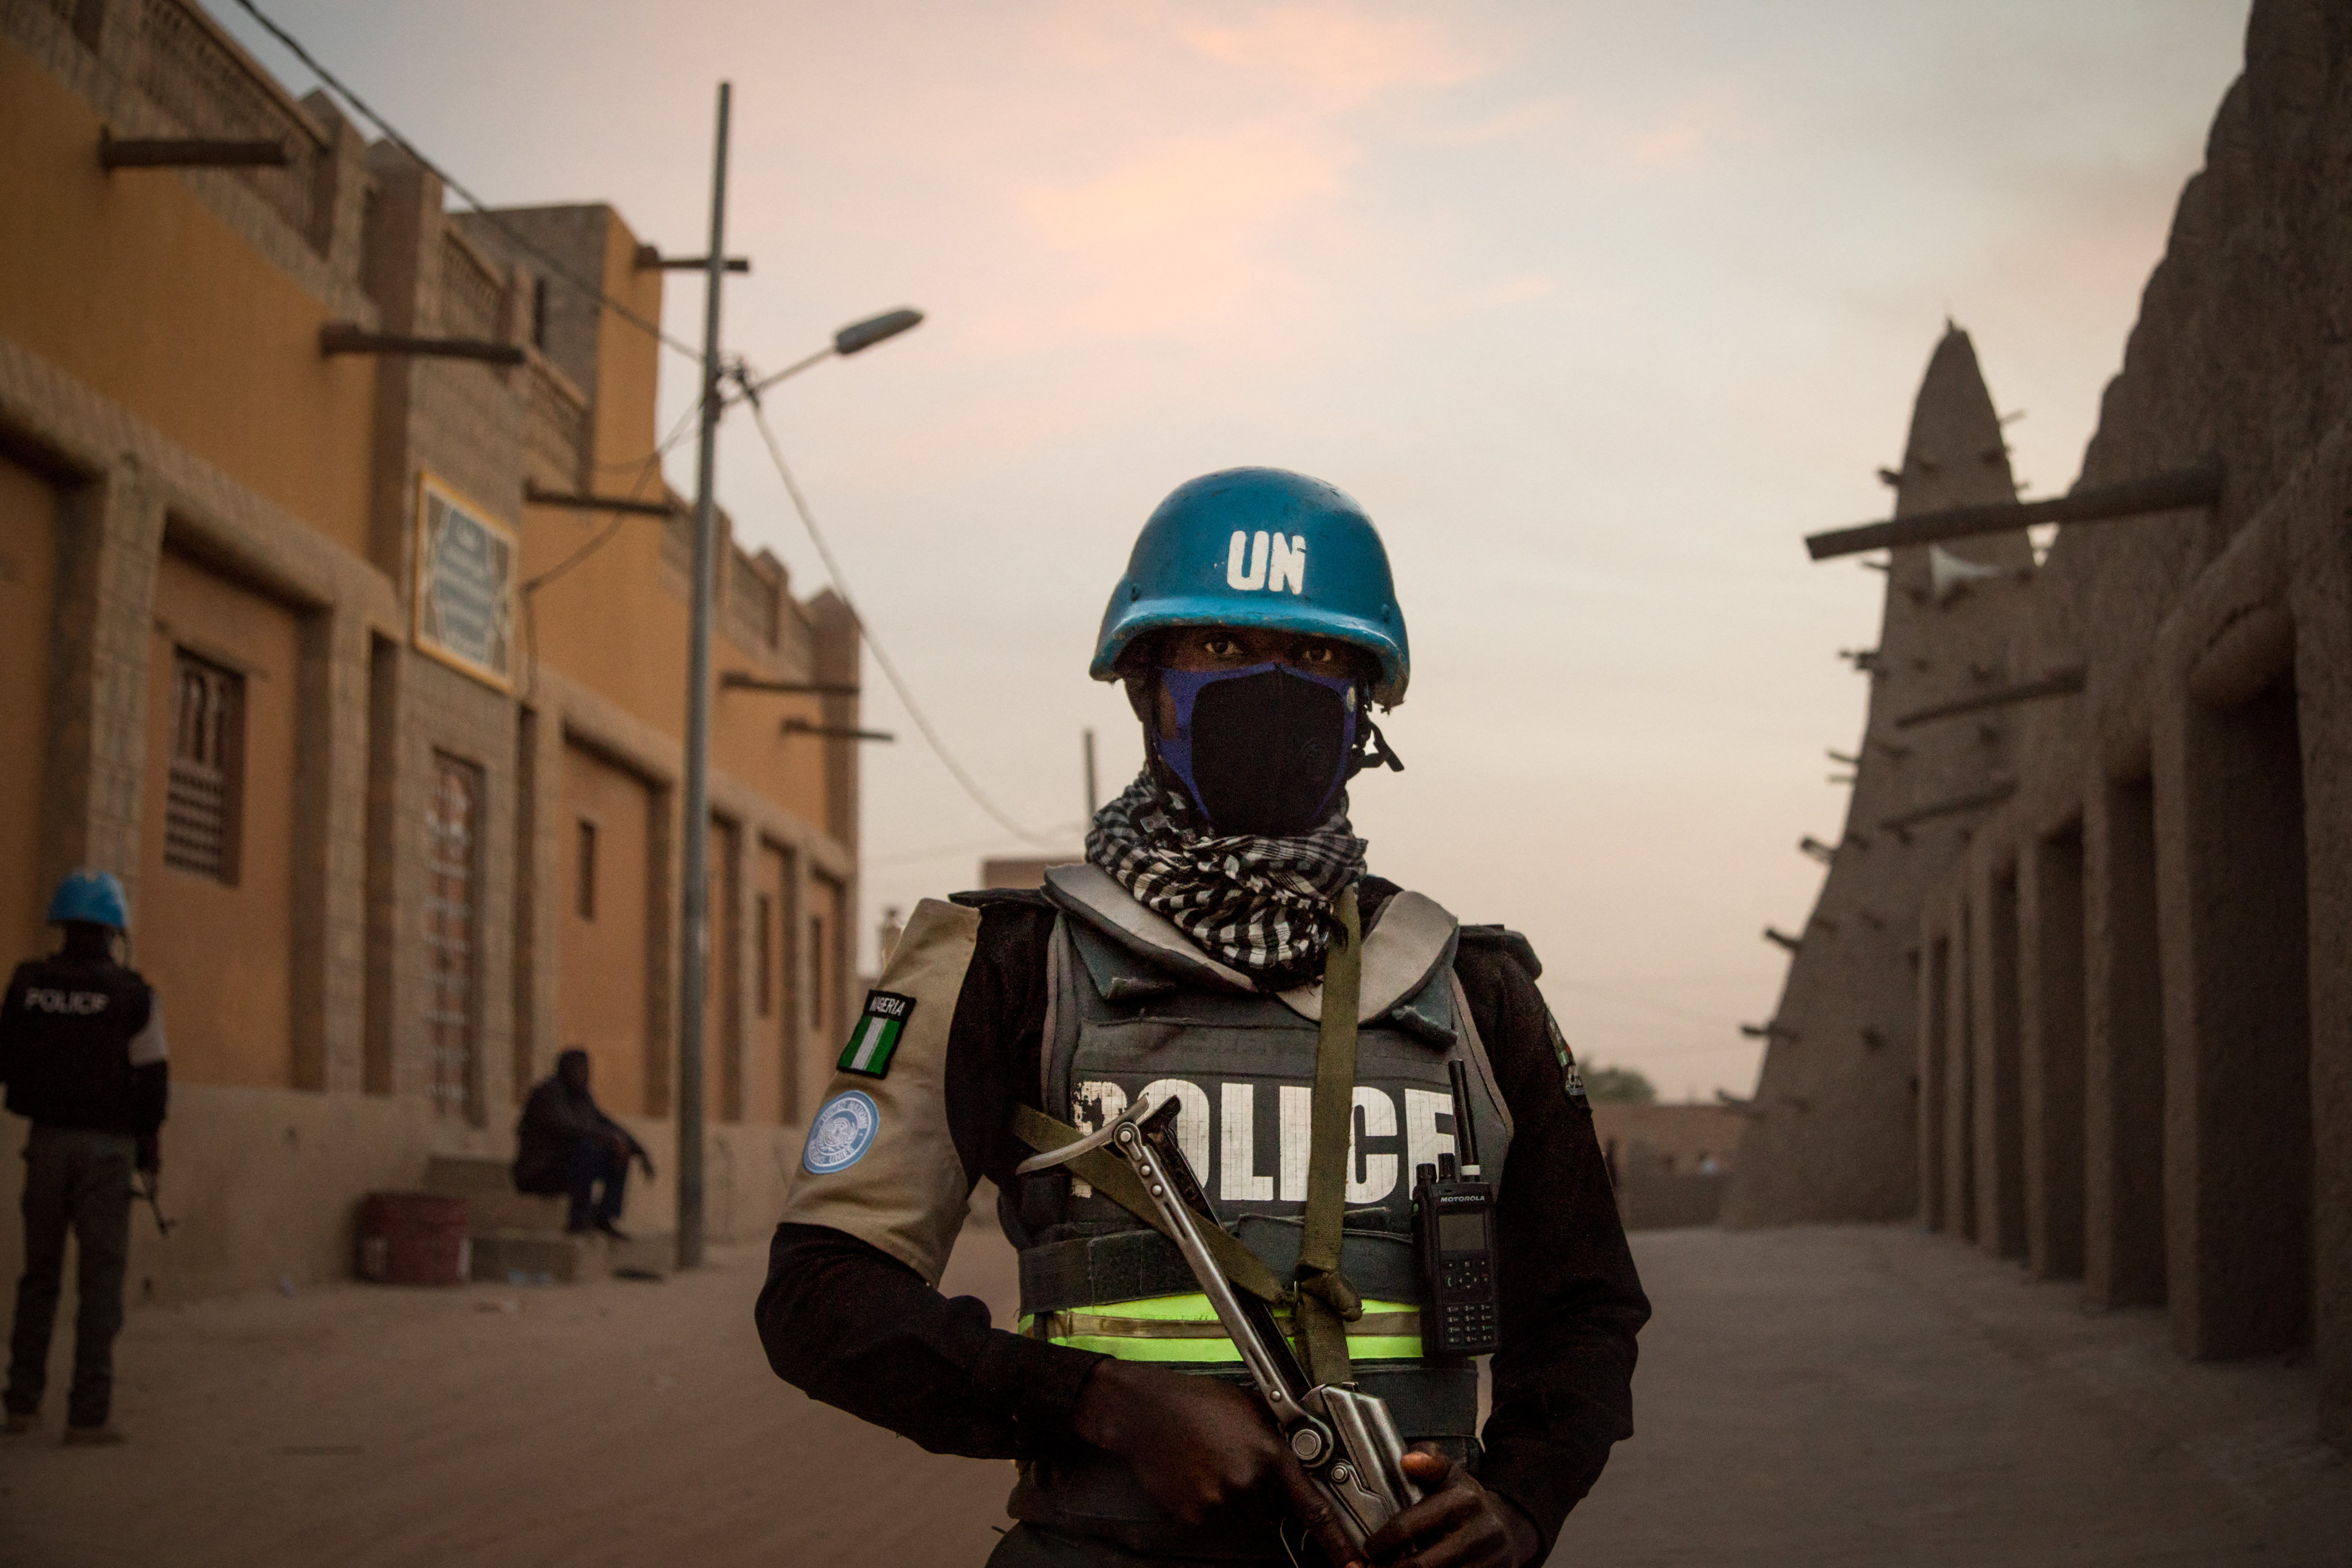 More than 170 peacekeepers have died in fighting, making MINUSMA the UN’s deadliest combat mission. File photo: AFP